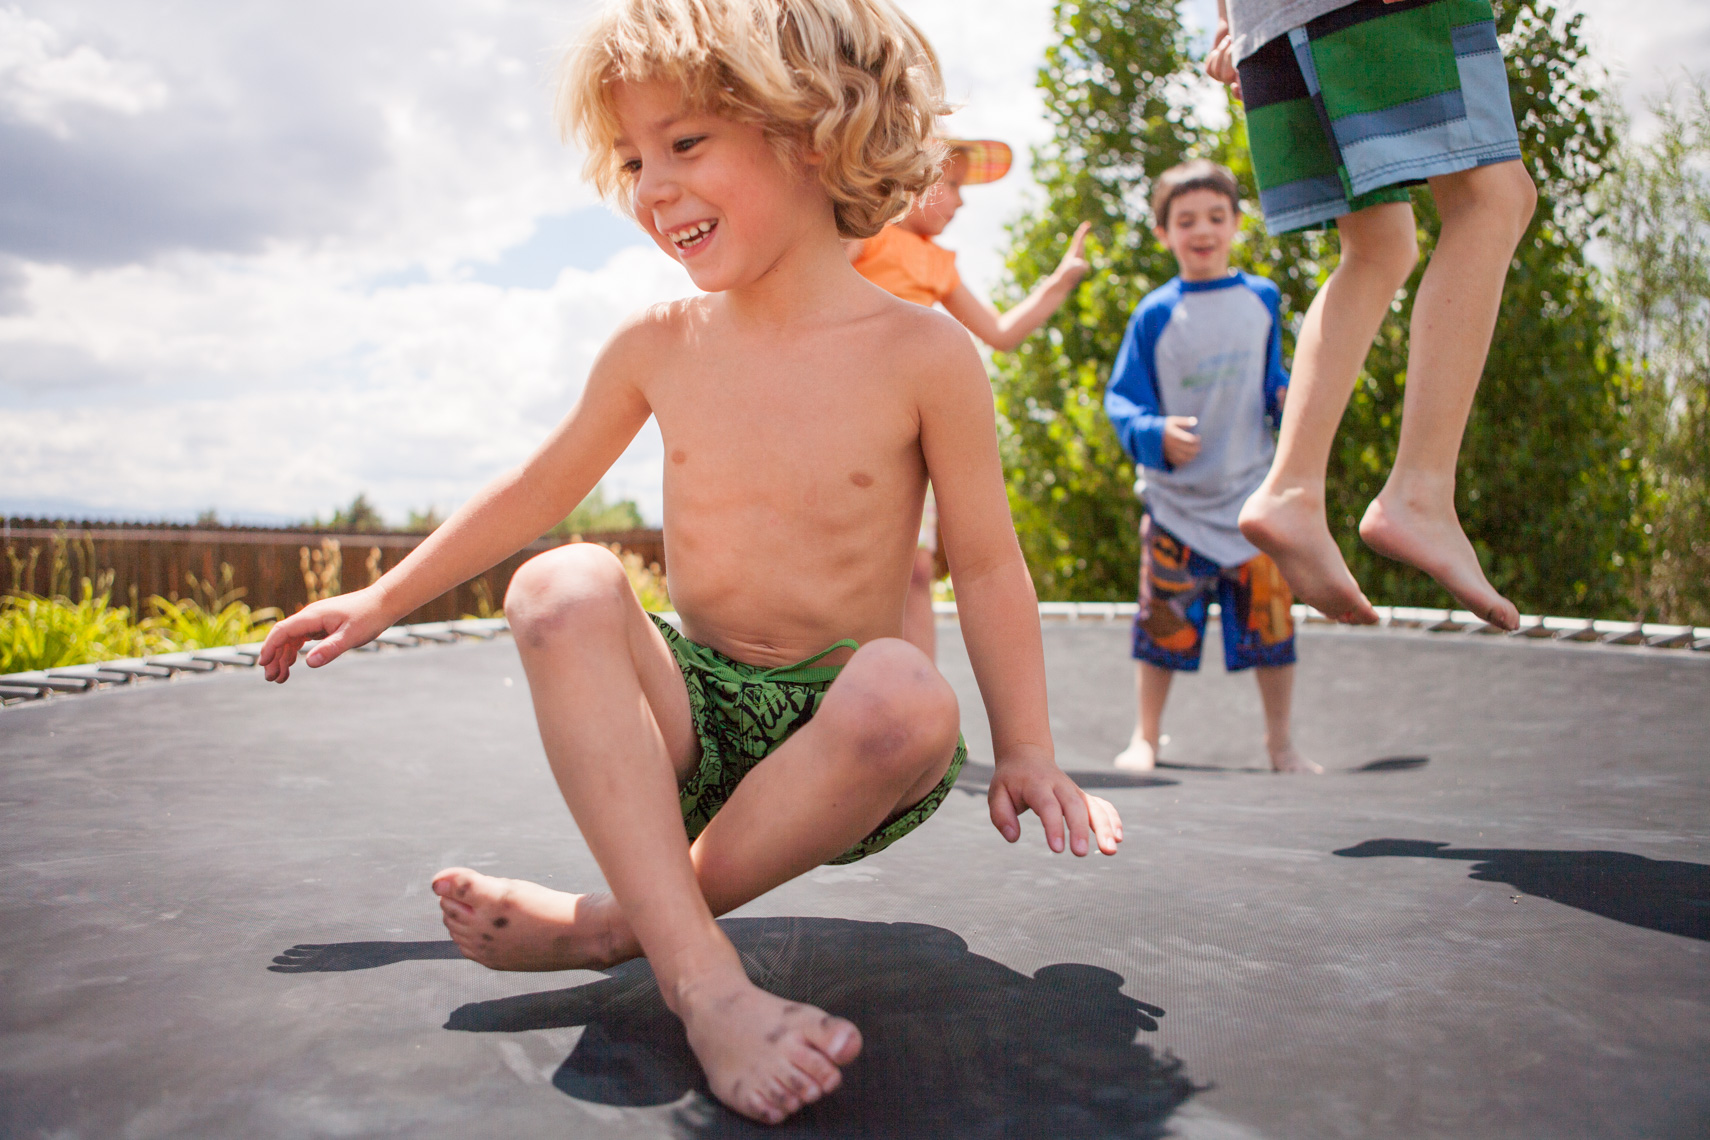 Young Boy on Trampoline